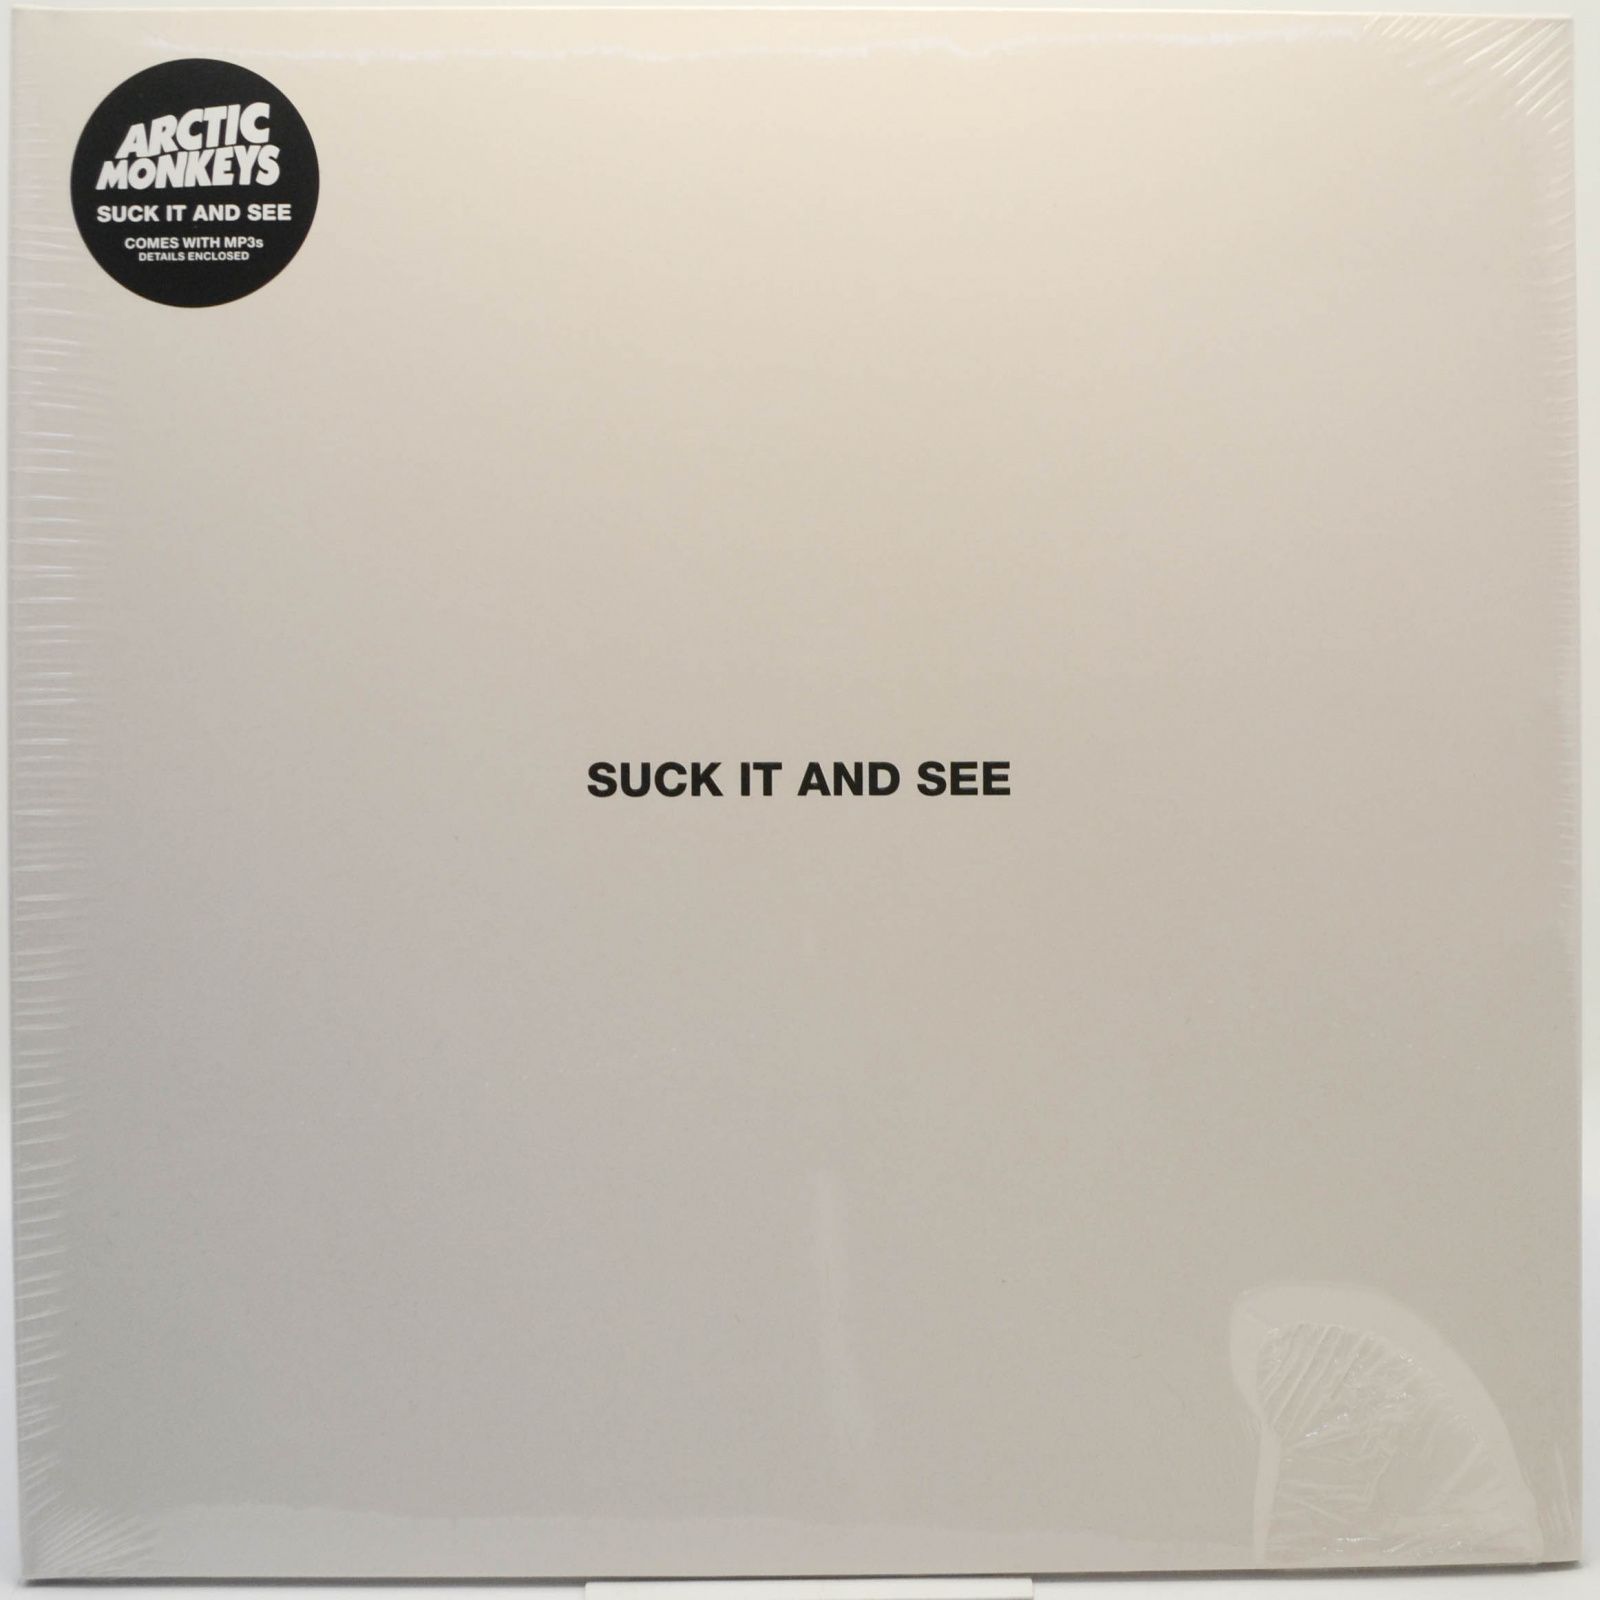 Arctic Monkeys — Suck It And See, 2011